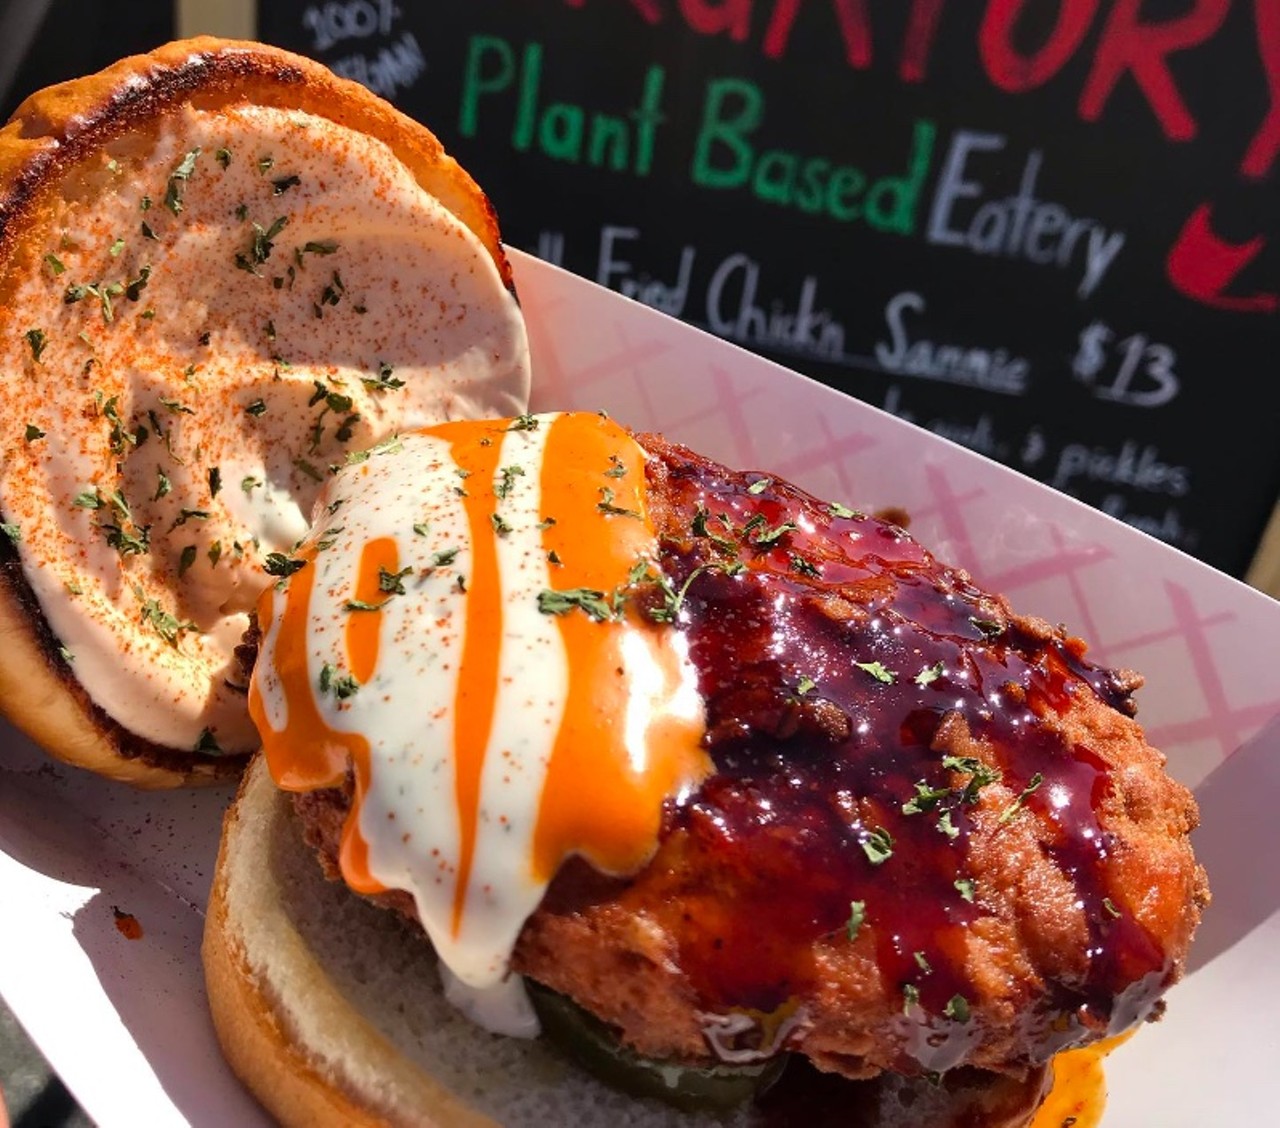 Purgatory Orlando
Pop up, various locations
A plant-based concept that aims to "fuck shit up," Purgatory serves massive burgers, sandwiches and late-night eats. You'll have to track down this pop-up at various events around town to get a taste, but it'll be well worth it when you do.